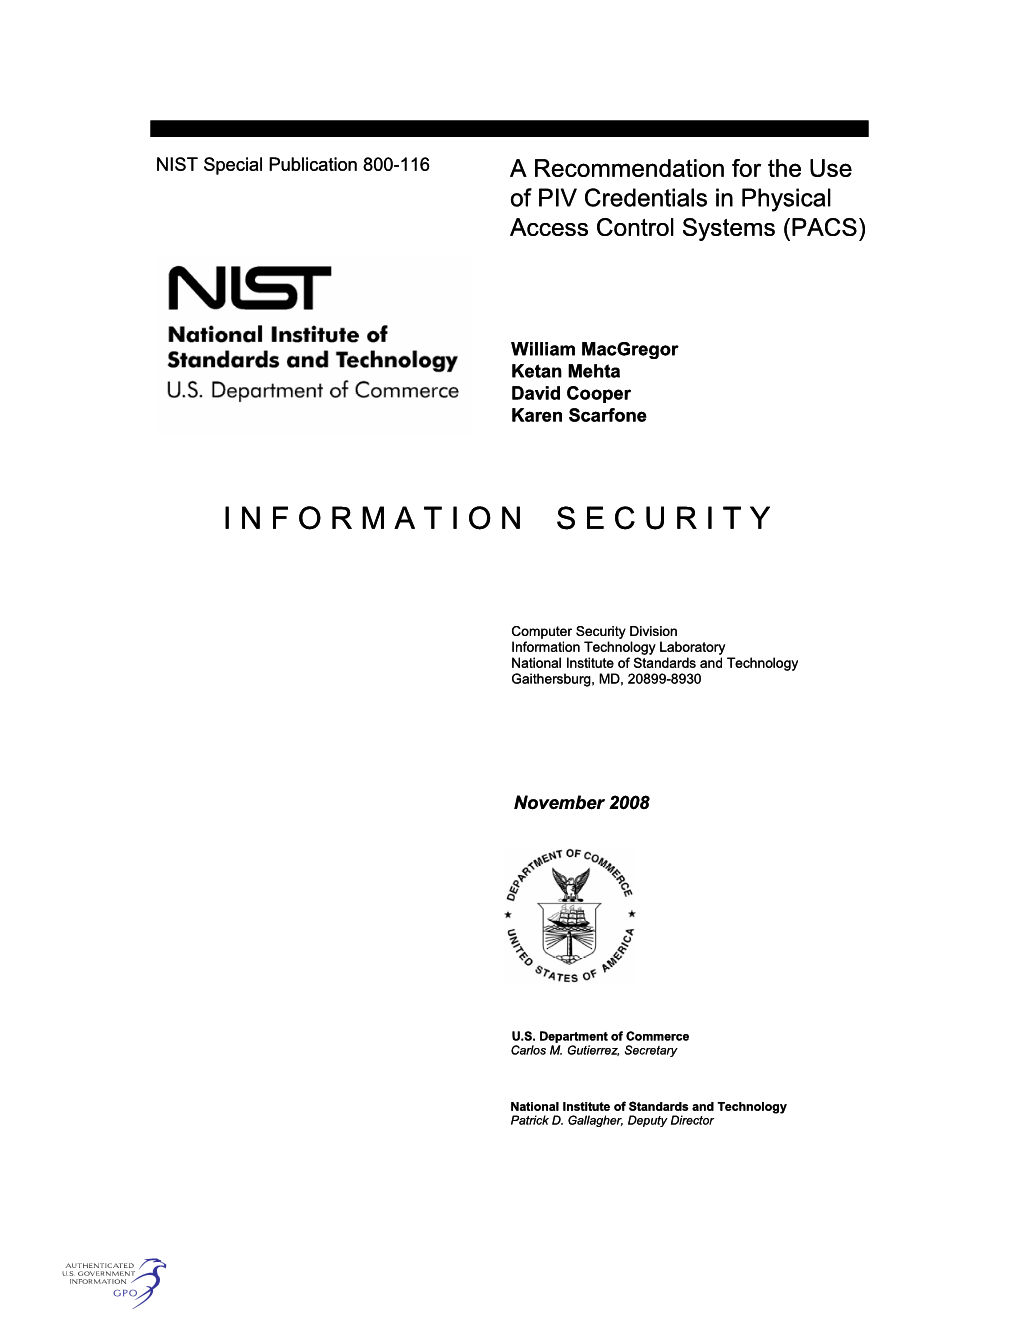 A Recommendation for the Use of PIV Credentials in Physical Access Control Systems (PACS)